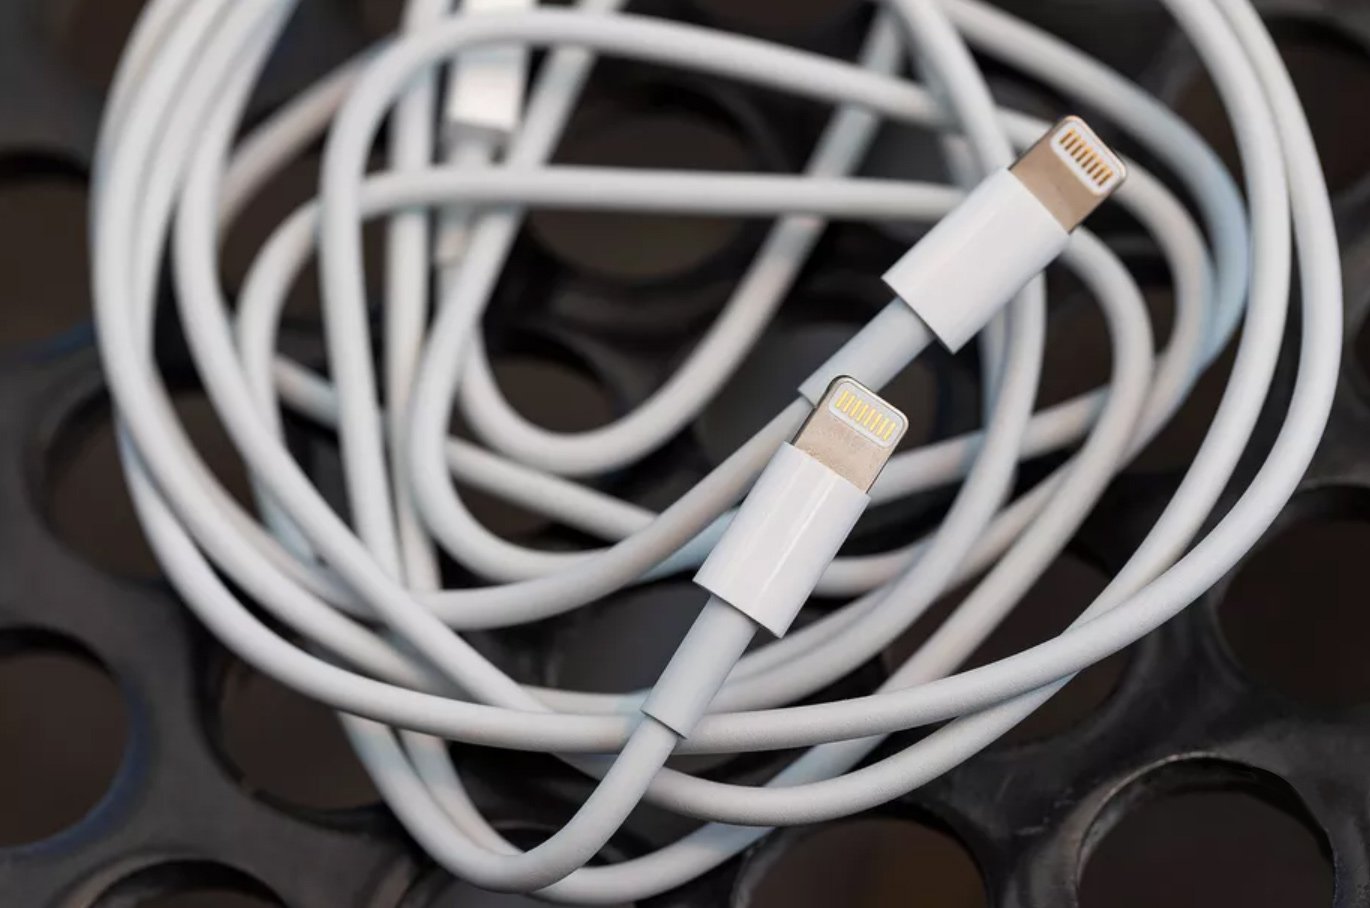 Ming-Chi Kuo: Apple says no to iPhone with USB-C port in the near future - iPhone

